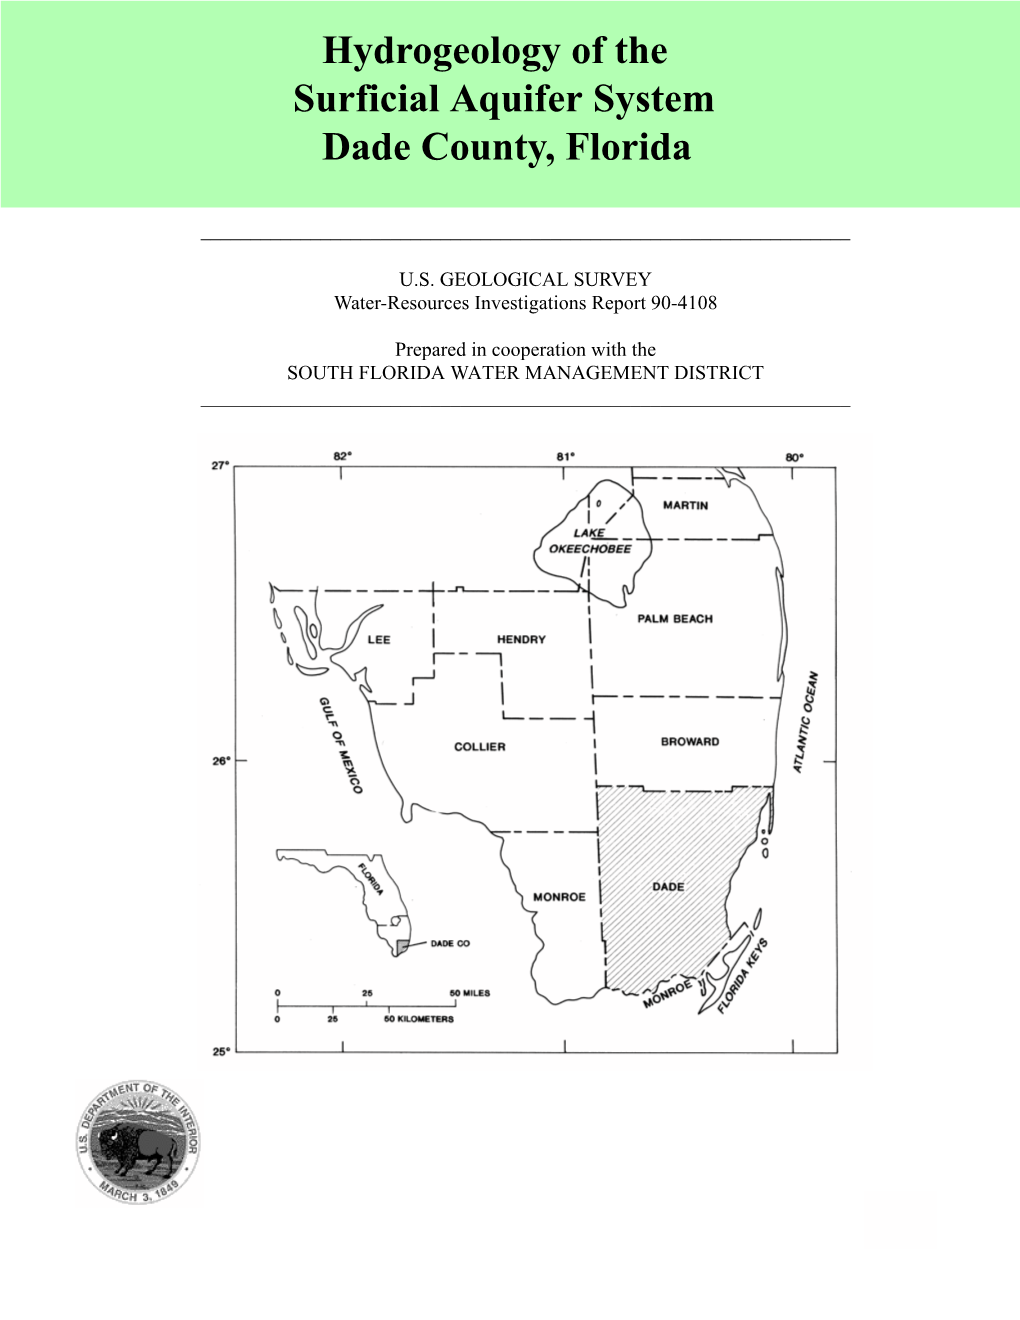 Hydrogeology of the Surficial Aquifer System Dade County, Florida